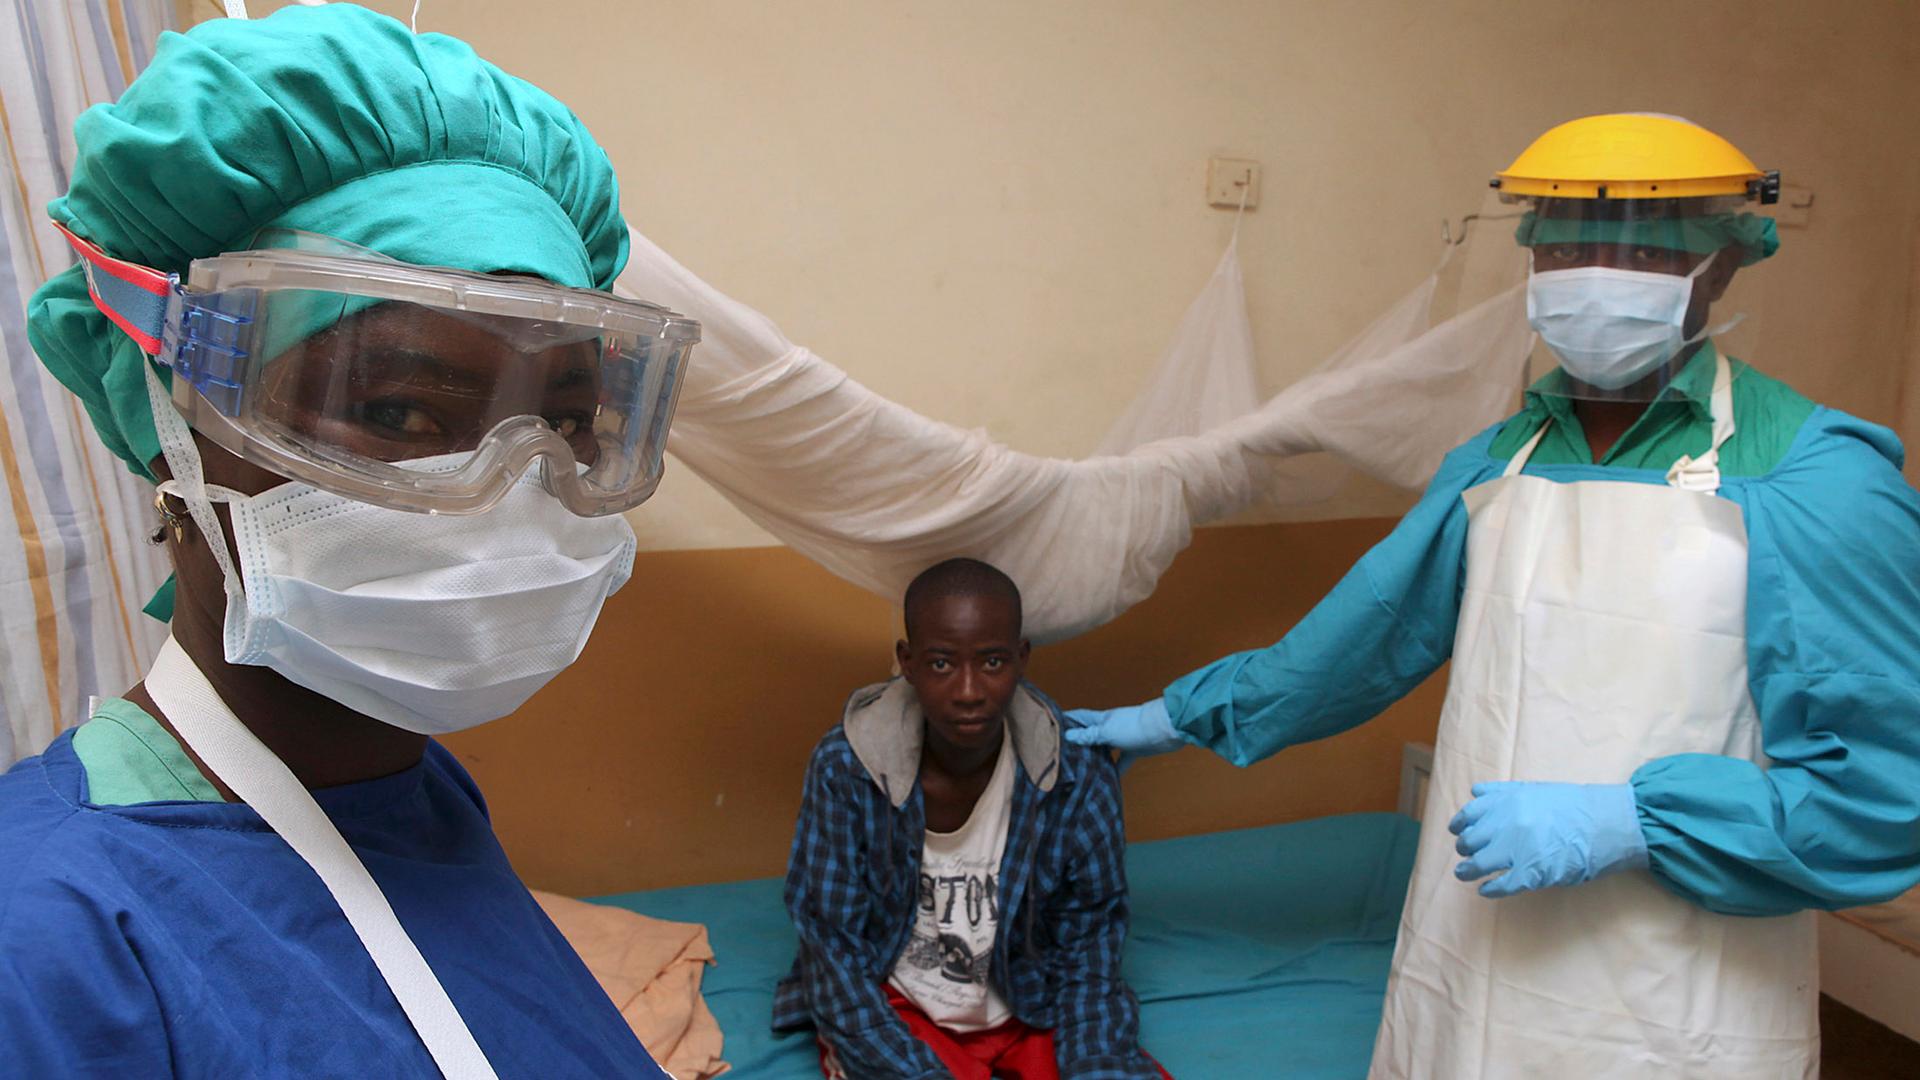 Sierra Leonean nurse Veronica Koroma (left) and doctor Donald Samuel Grant (right) stand by a patient in the Lassa fever ward at Kenema Government Hospital in February, 2011